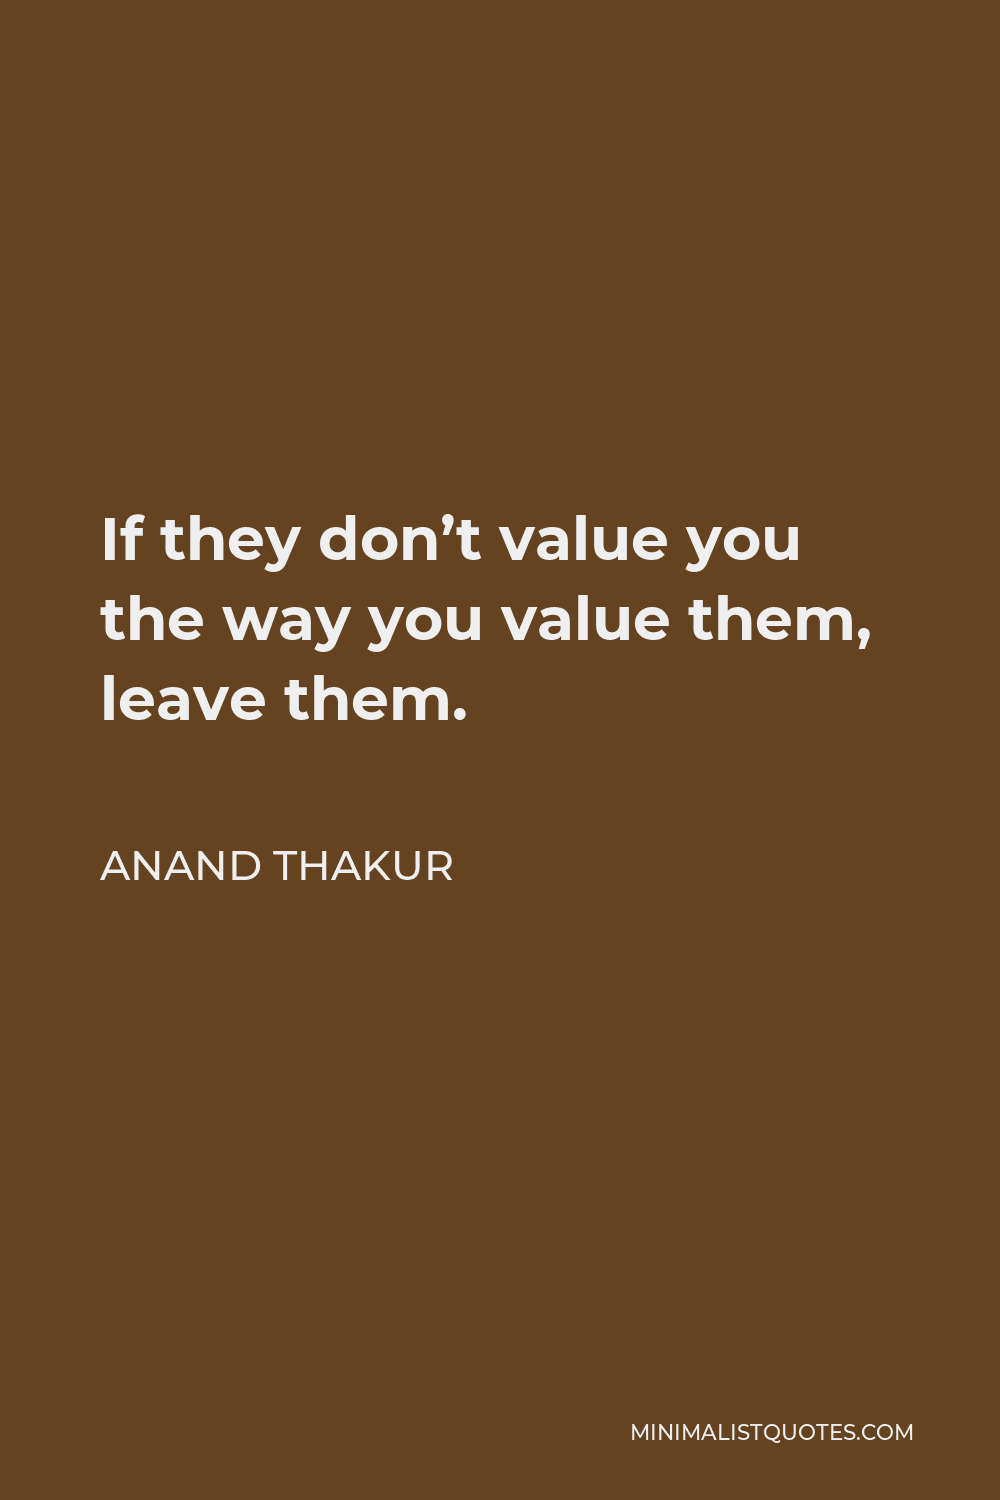 Anand Thakur Quote - If they don’t value you the way you value them, leave them.